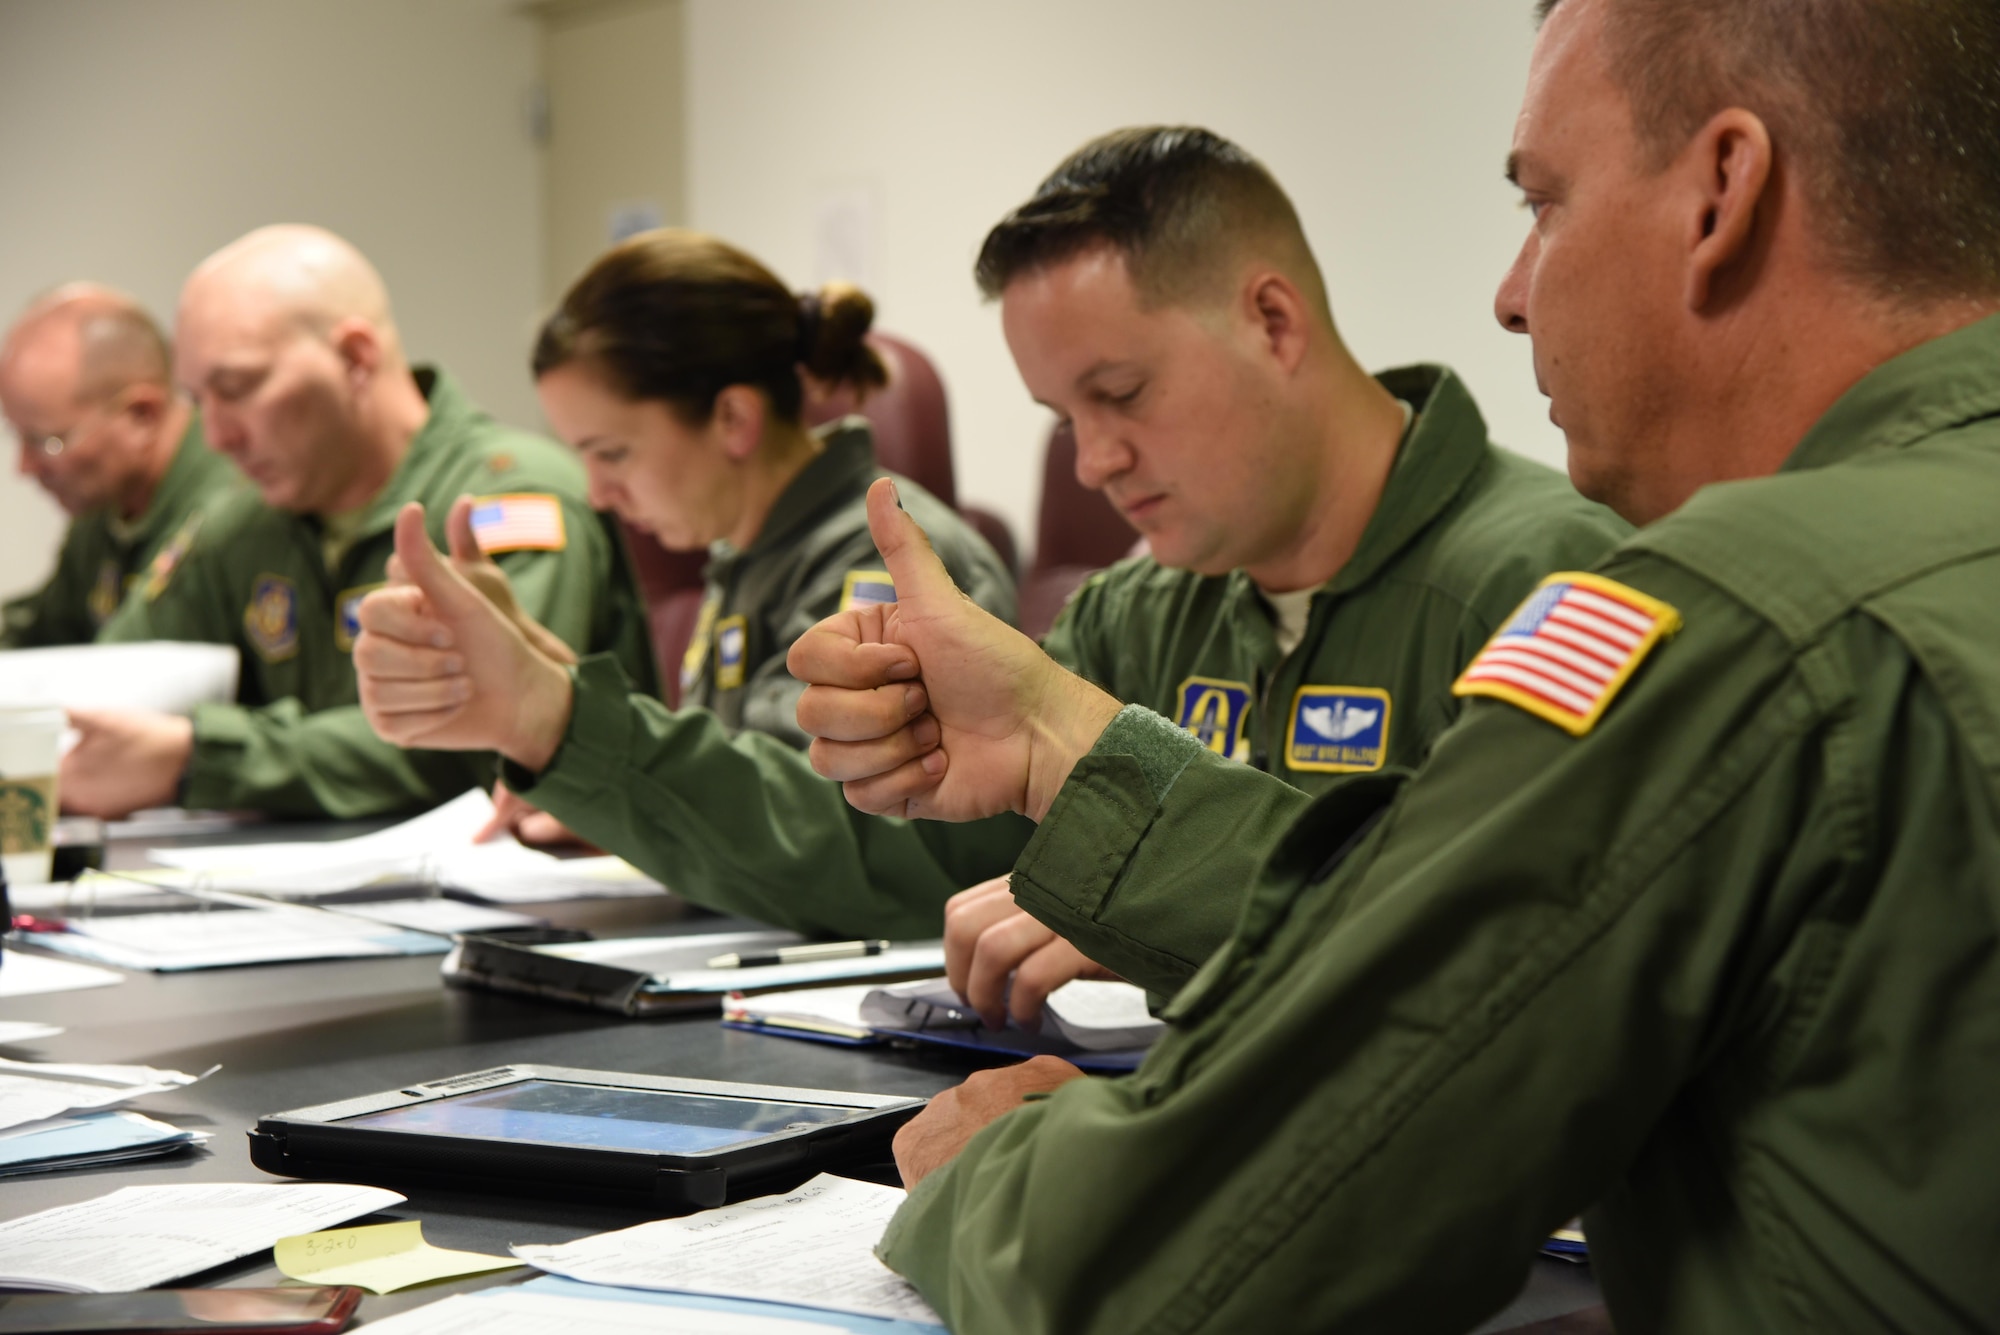 Members of the 36th Aeromedical Evacuation Squadron give the thumbs up to show their understanding of safety guidelines during a mission briefing Oct. 14. The mission was their first out of Keesler Air Force Base, Miss. in coordination with the 53rd Weather Reconnaissance Squadron. (U.S. Air Force photo/Maj. Marnee A.C. Losurdo)